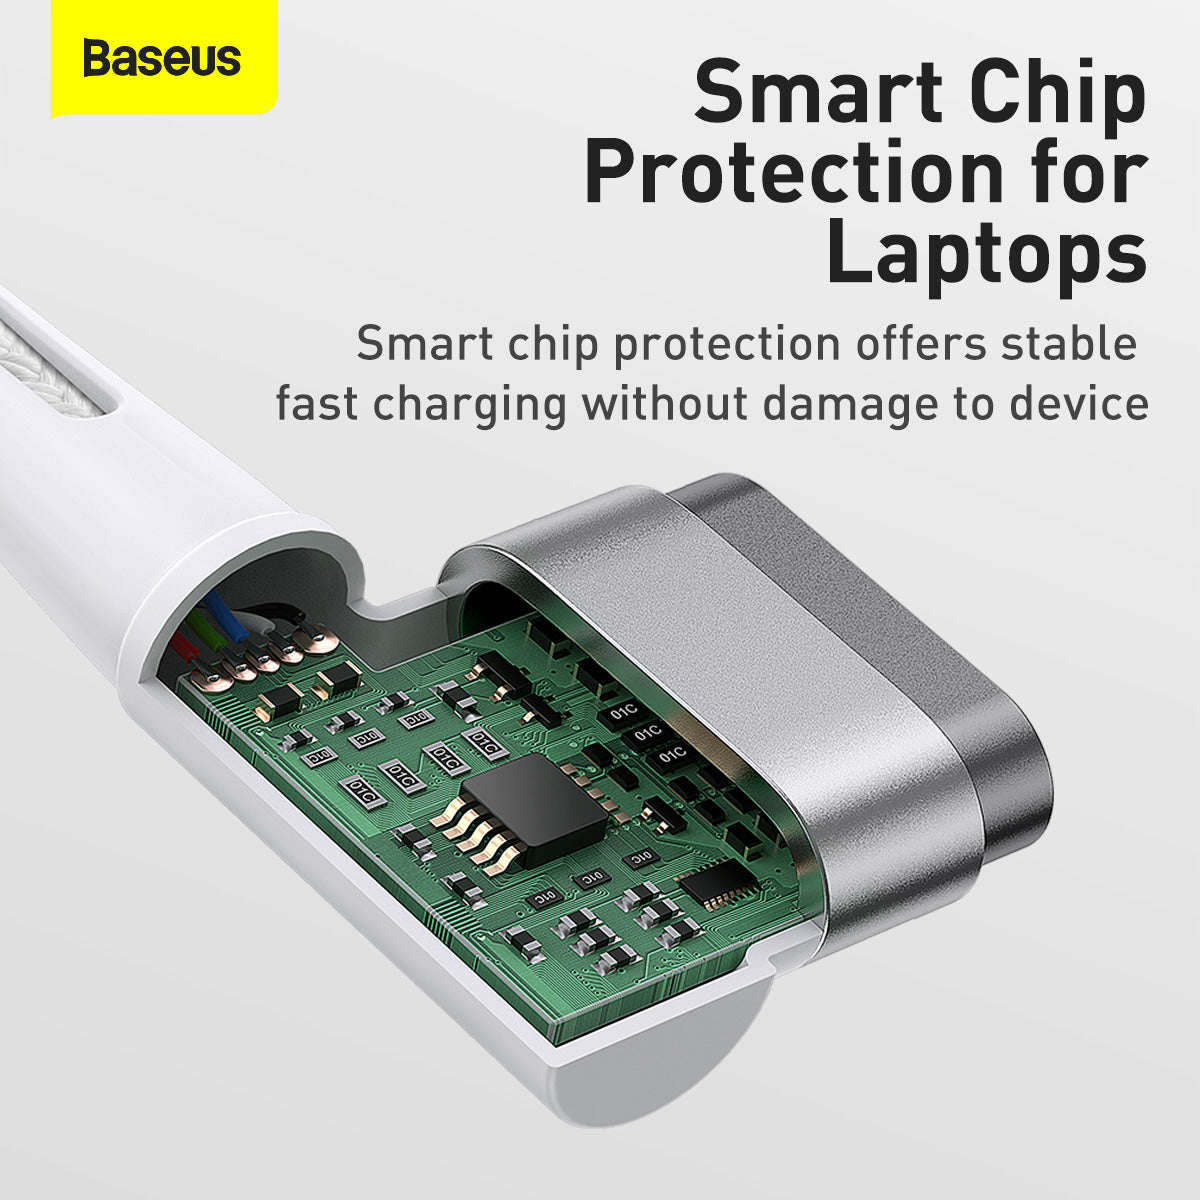 Baseus Zinc Magnetic Series iP Laptop Charging Cable Type-C to L-shaped Port 60W 2m White